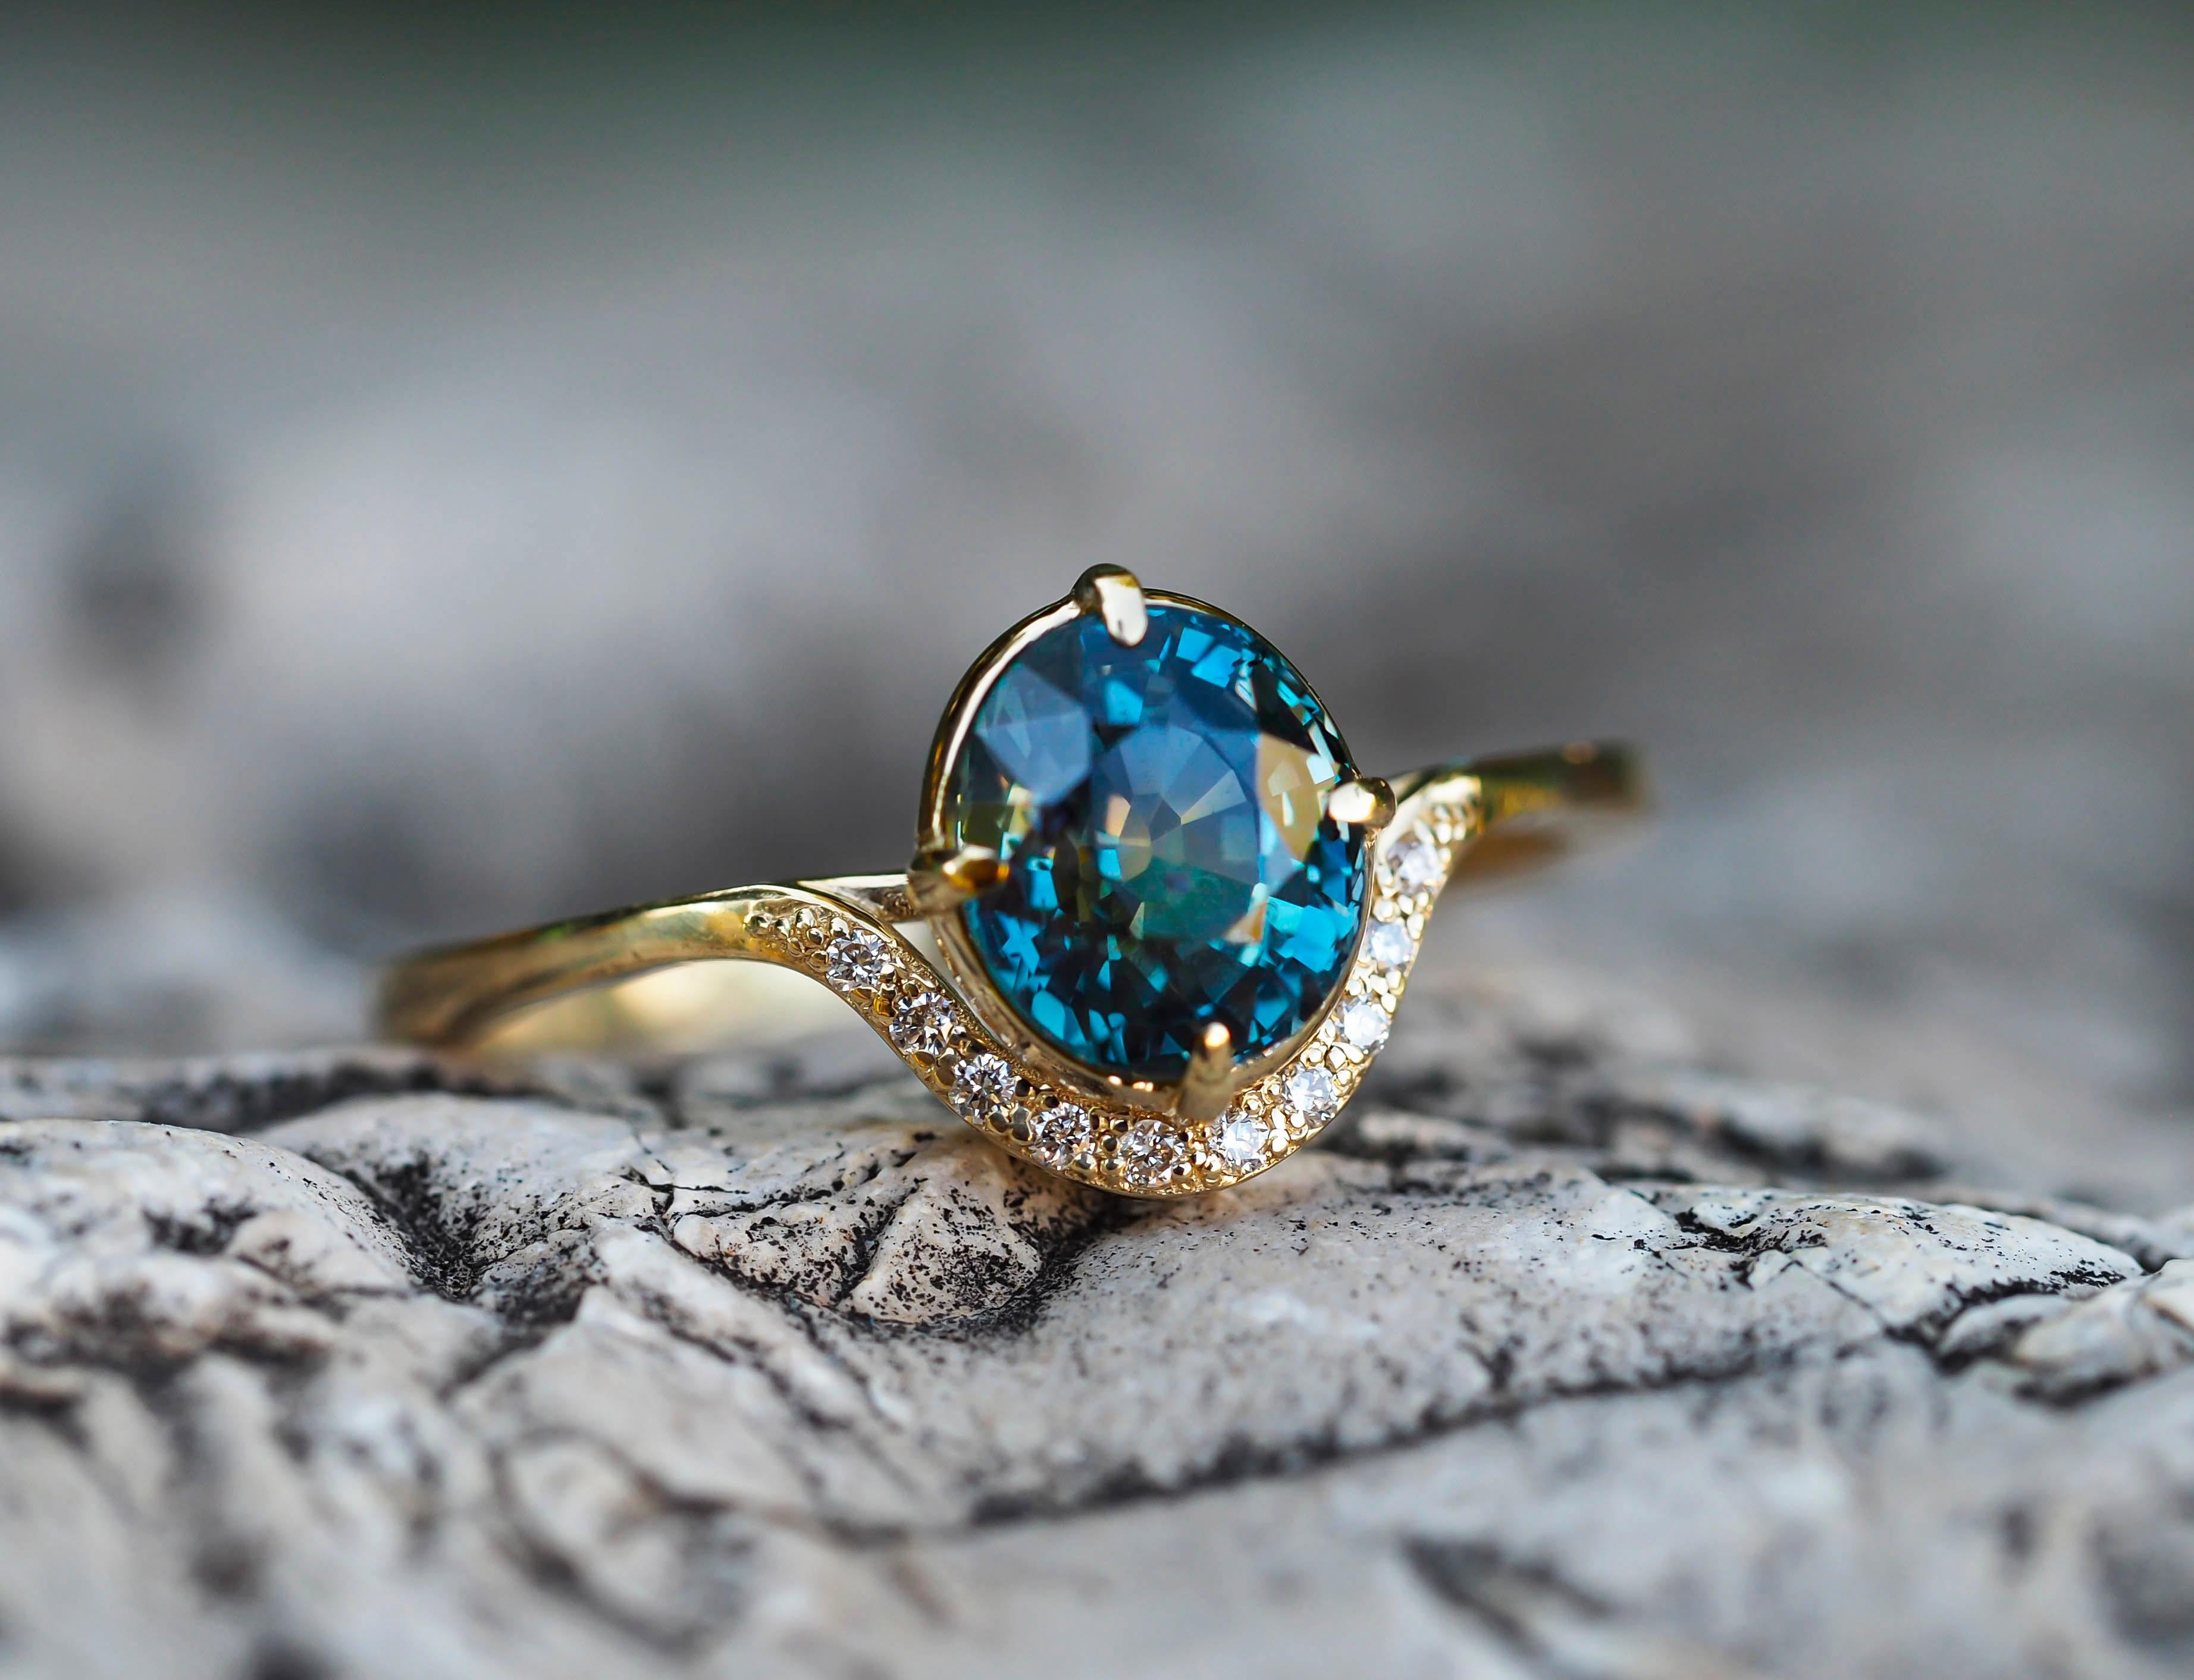 14 Kt Gold Ring with Sapphire and Diamonds 4